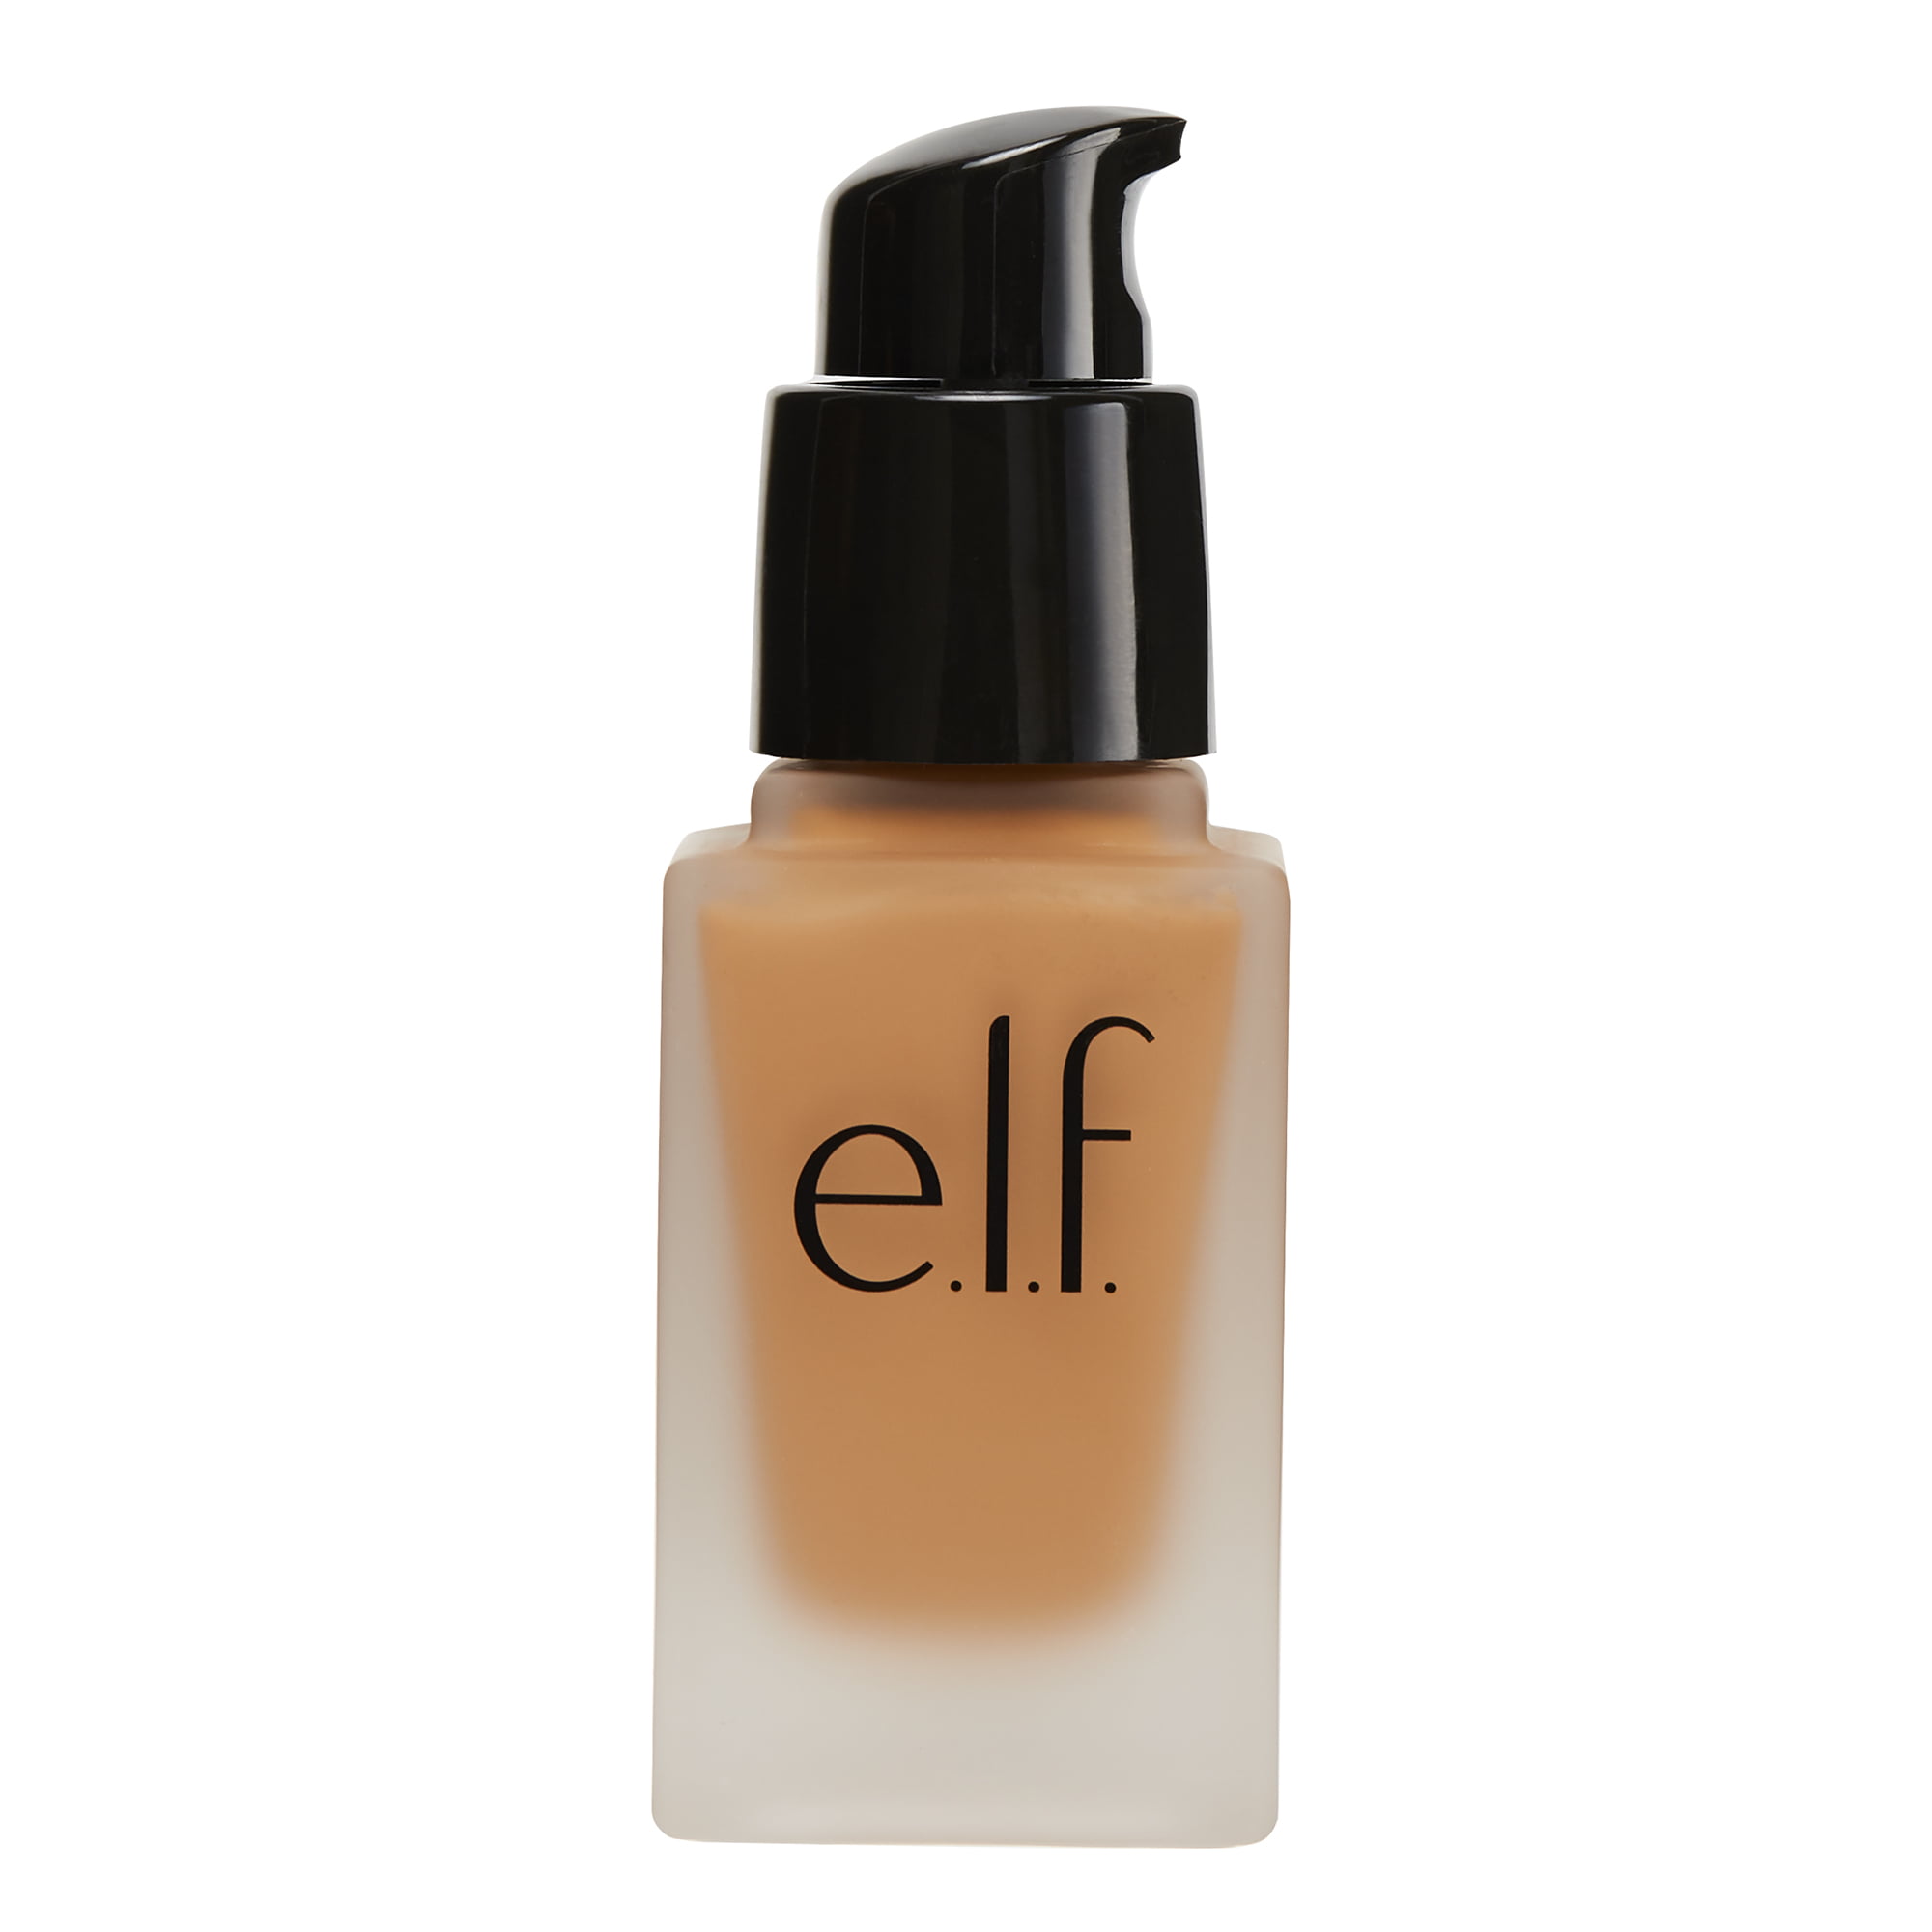 Elf Flawless Finish Foundation Color Chart